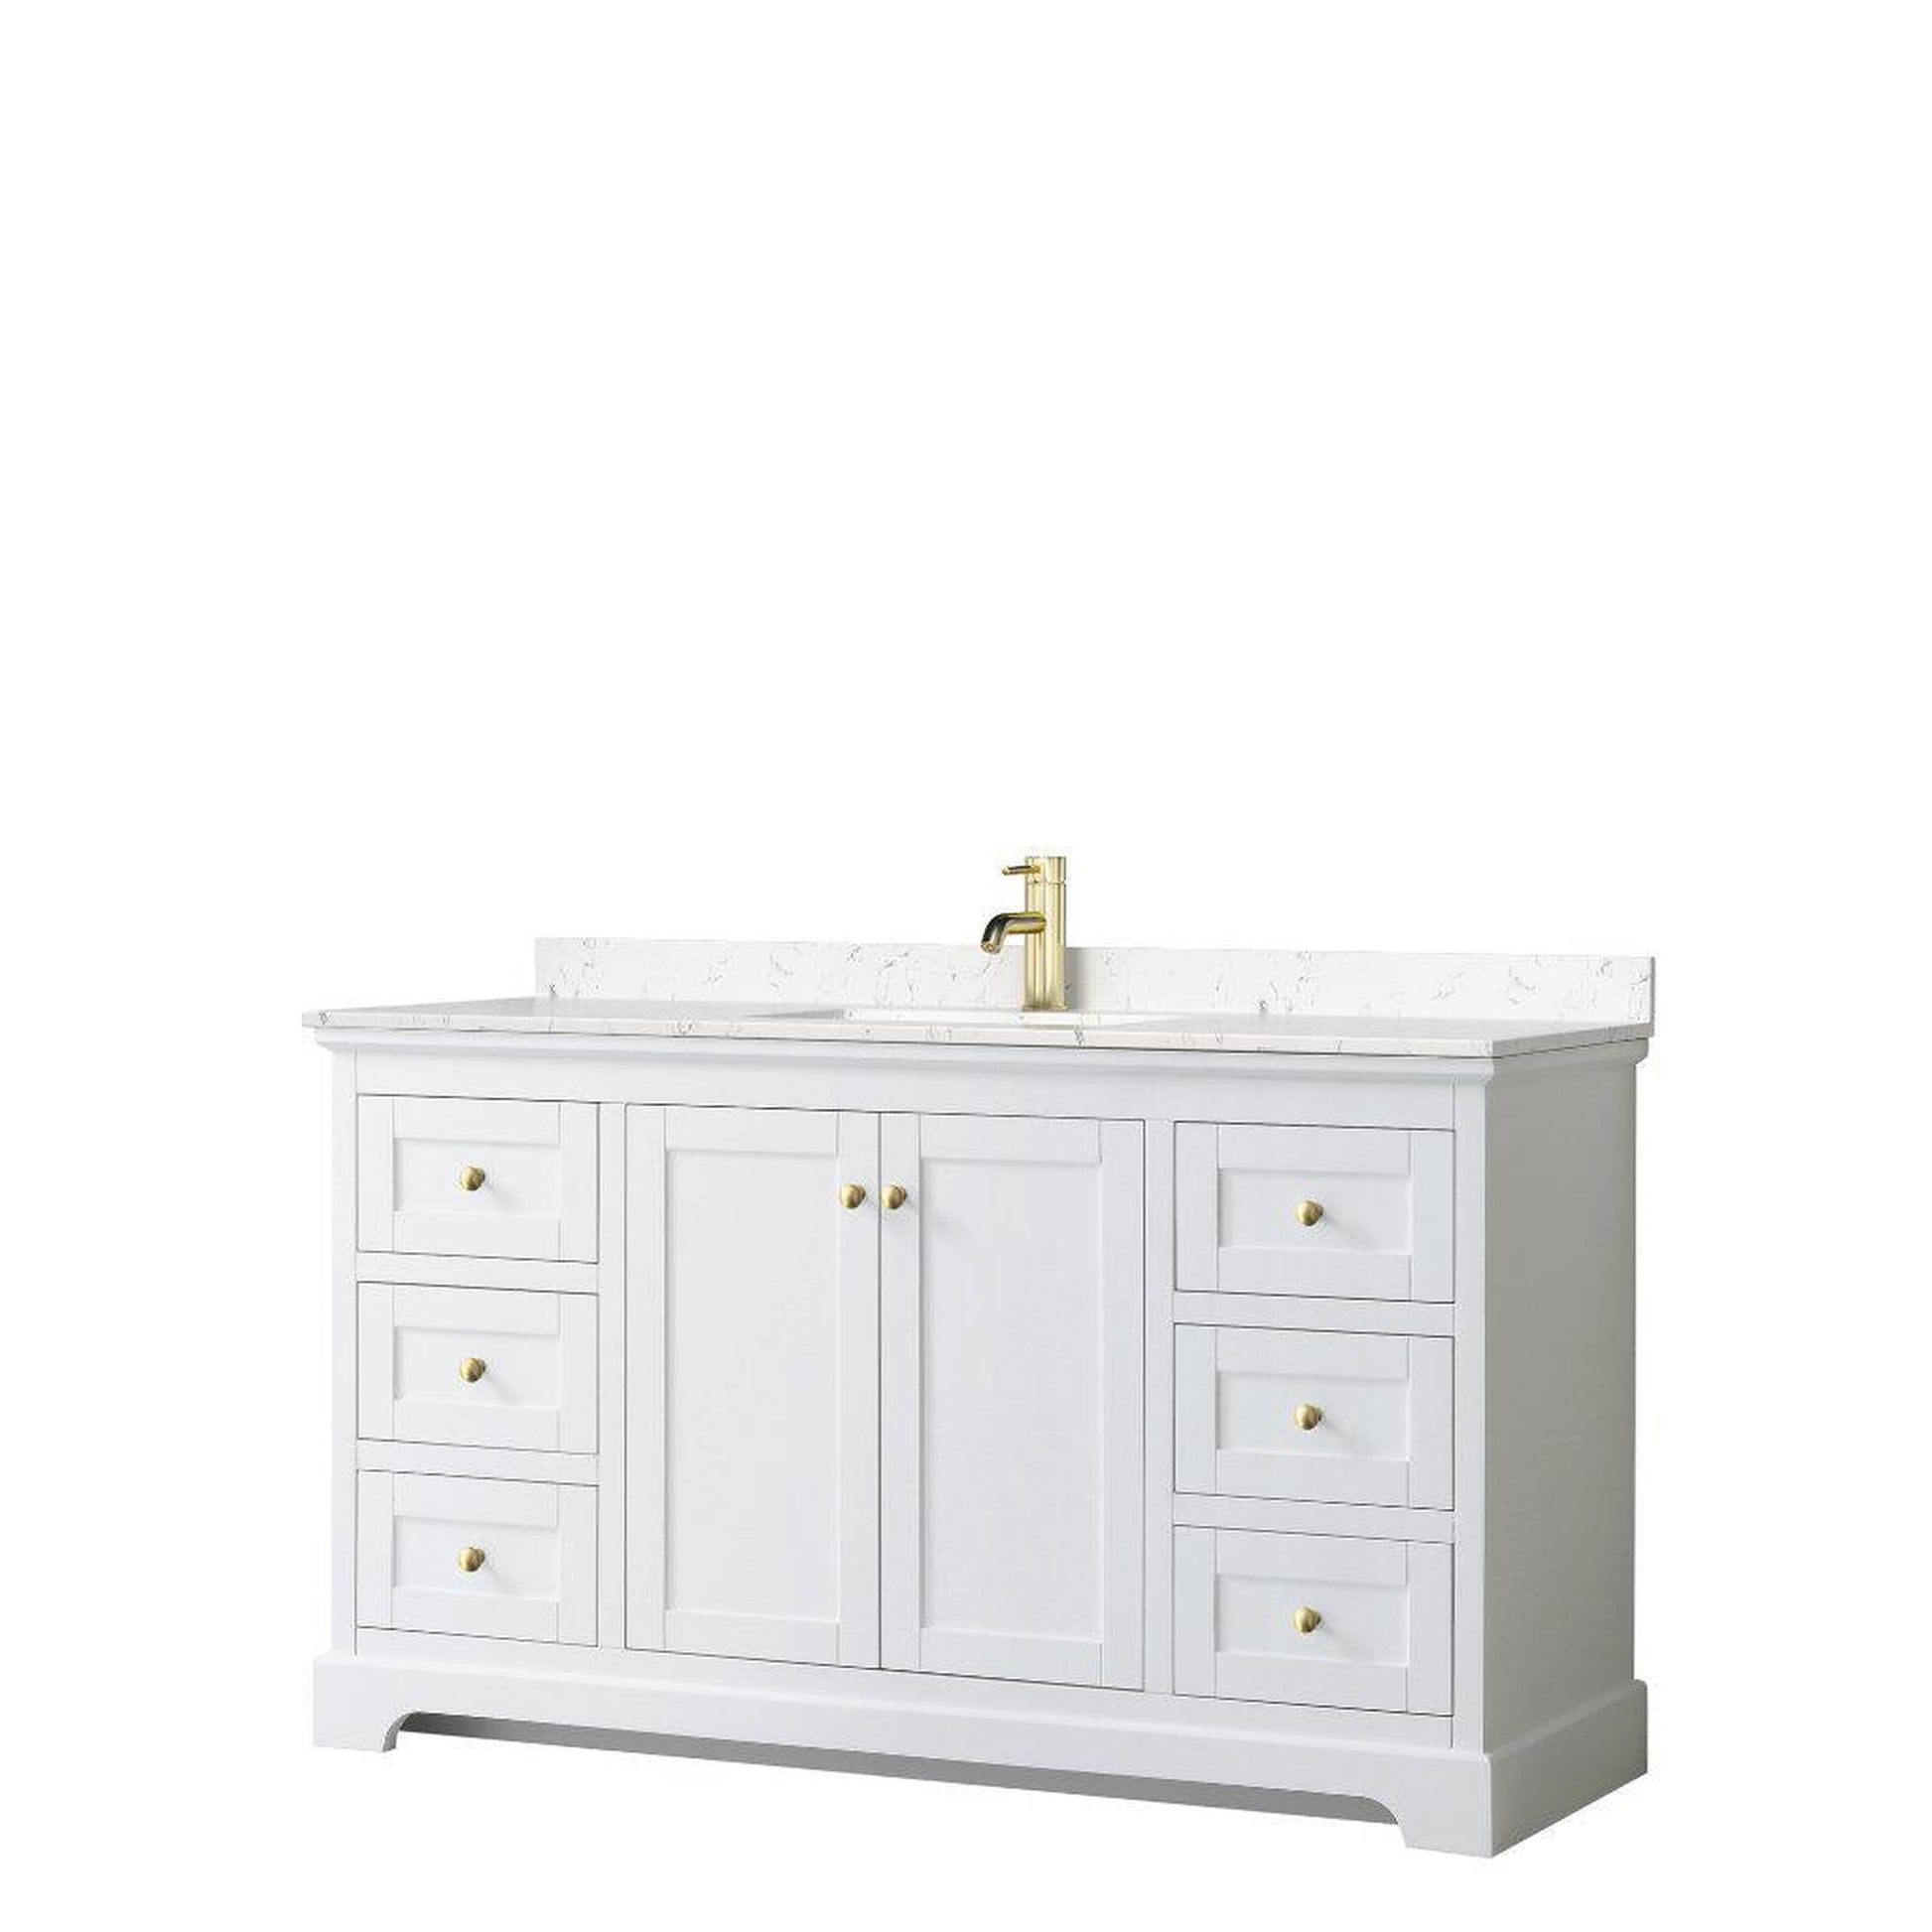 Wyndham Collection Avery 60" White Single Bathroom Vanity, Light-Vein Carrara Cultured Marble Countertop With 1-Hole Faucet, Square Sink, Gold Trims